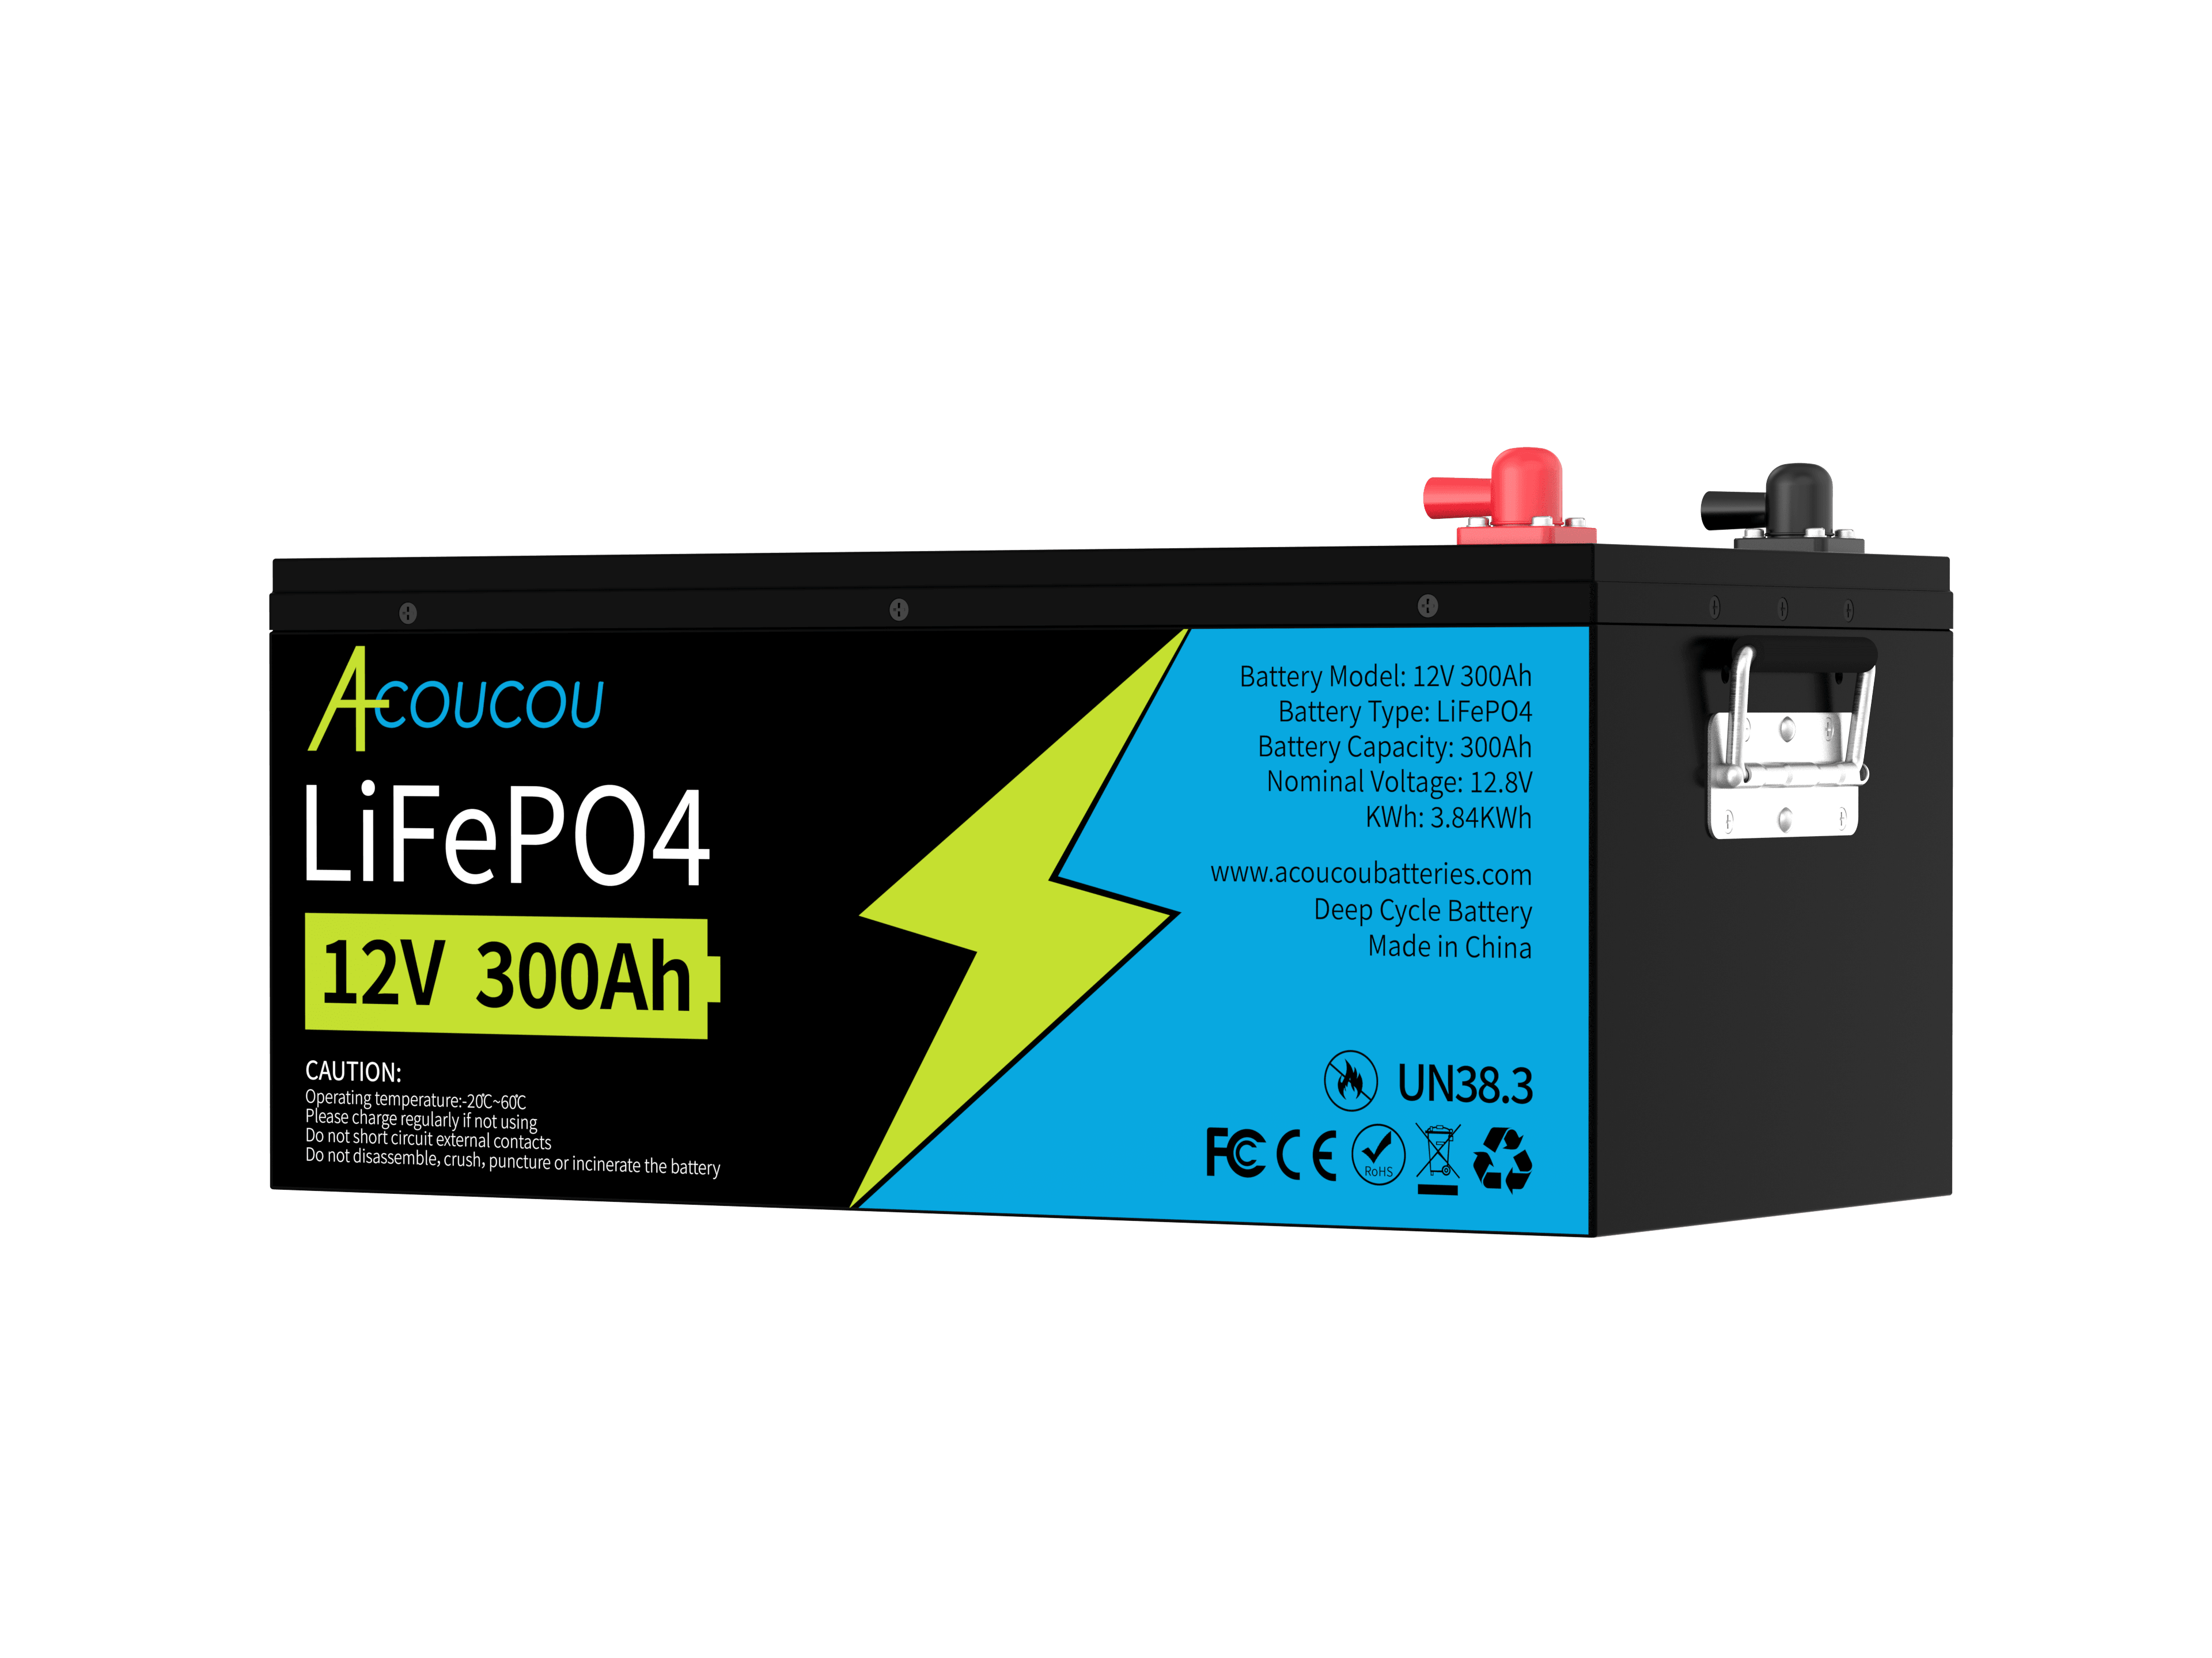 Acoucou MaxOne 12V 300Ah Bluetooth Lithium LiFePO4 Deep Cycle Battery,RV Marine Motor Golfcart Battery - Acoucoubatteries